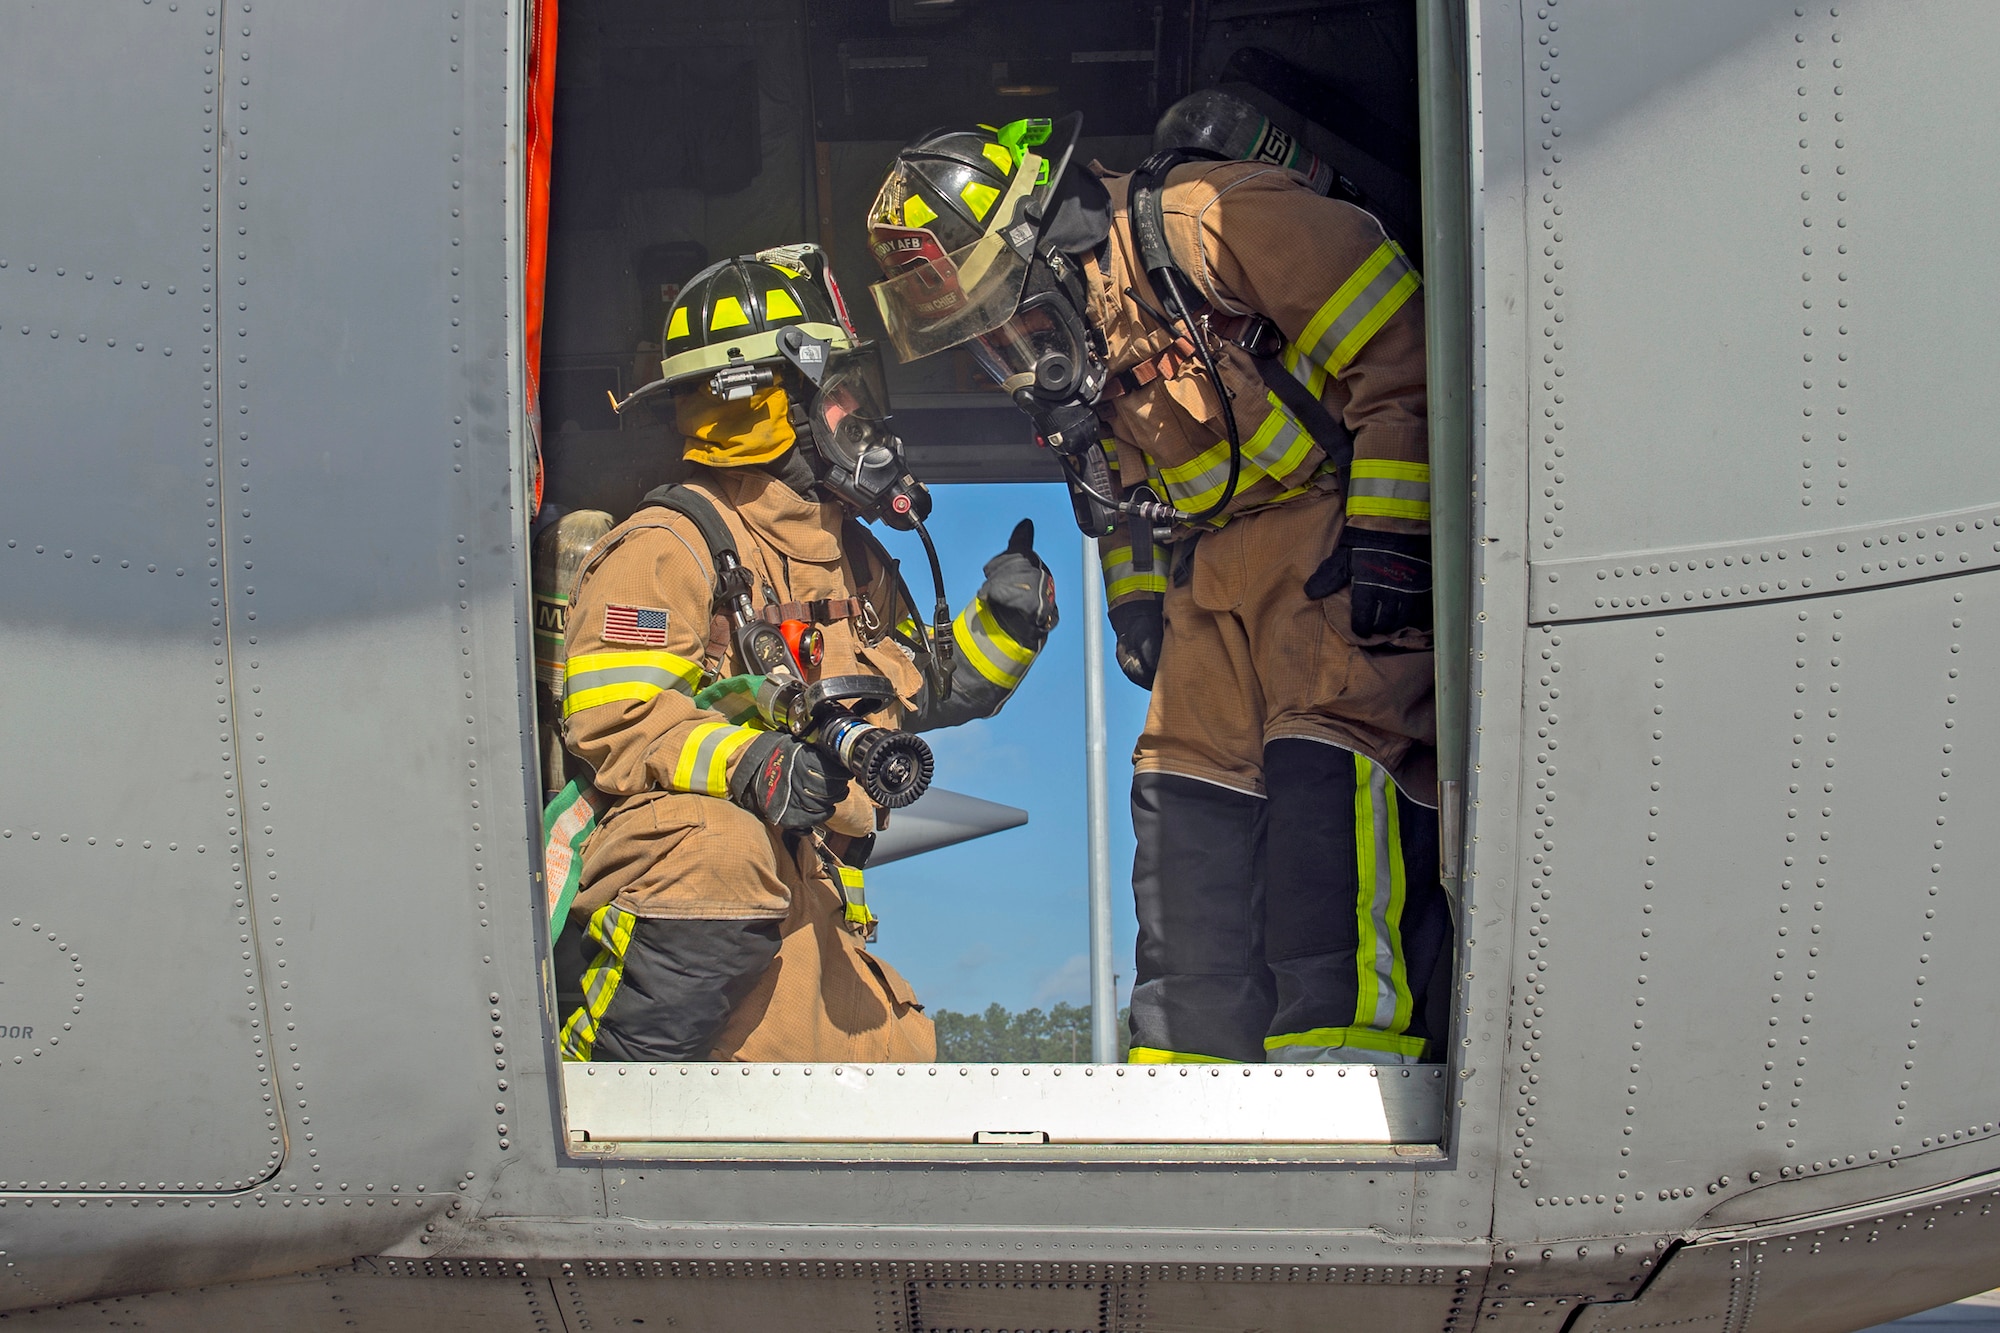 Staff Sgt. Matthew Montville, left, gives a thumbs up to Staff Sgt. Tyler McFarland, right, both 23d Civil Engineering Squadron firefighter crew chiefs, during an HC-130J Combat King II egress training, July 11, 2019, on Moody Air Force Base, Ga. The 23d CES conducted the exercise to simulate the rescue of victims from a smoking C-130. The firefighters were tasked with locating and providing ventilation within the aircraft to safely remove the victims. (U.S. Air Force photo by Airman Azaria E. Foster)